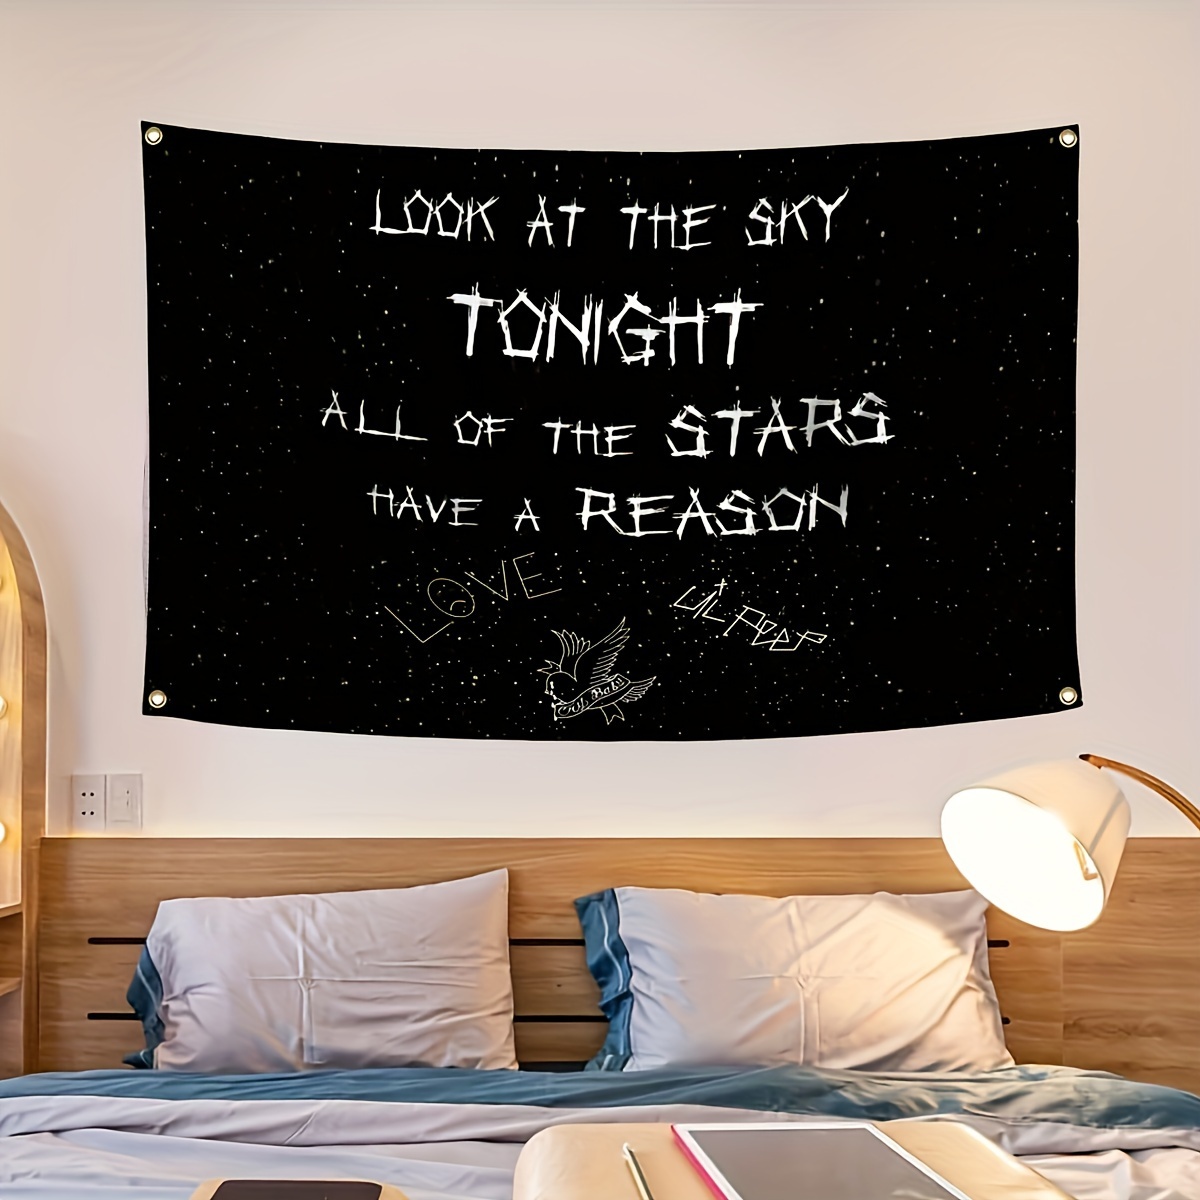 

Graphic Musical Theme Tapestry - Woven Polyester Wall Hanging Poster, Aesthetic Room Decor, Starry Sky Quote, Transverse Orientation, 59.1 X 35.4 Inches